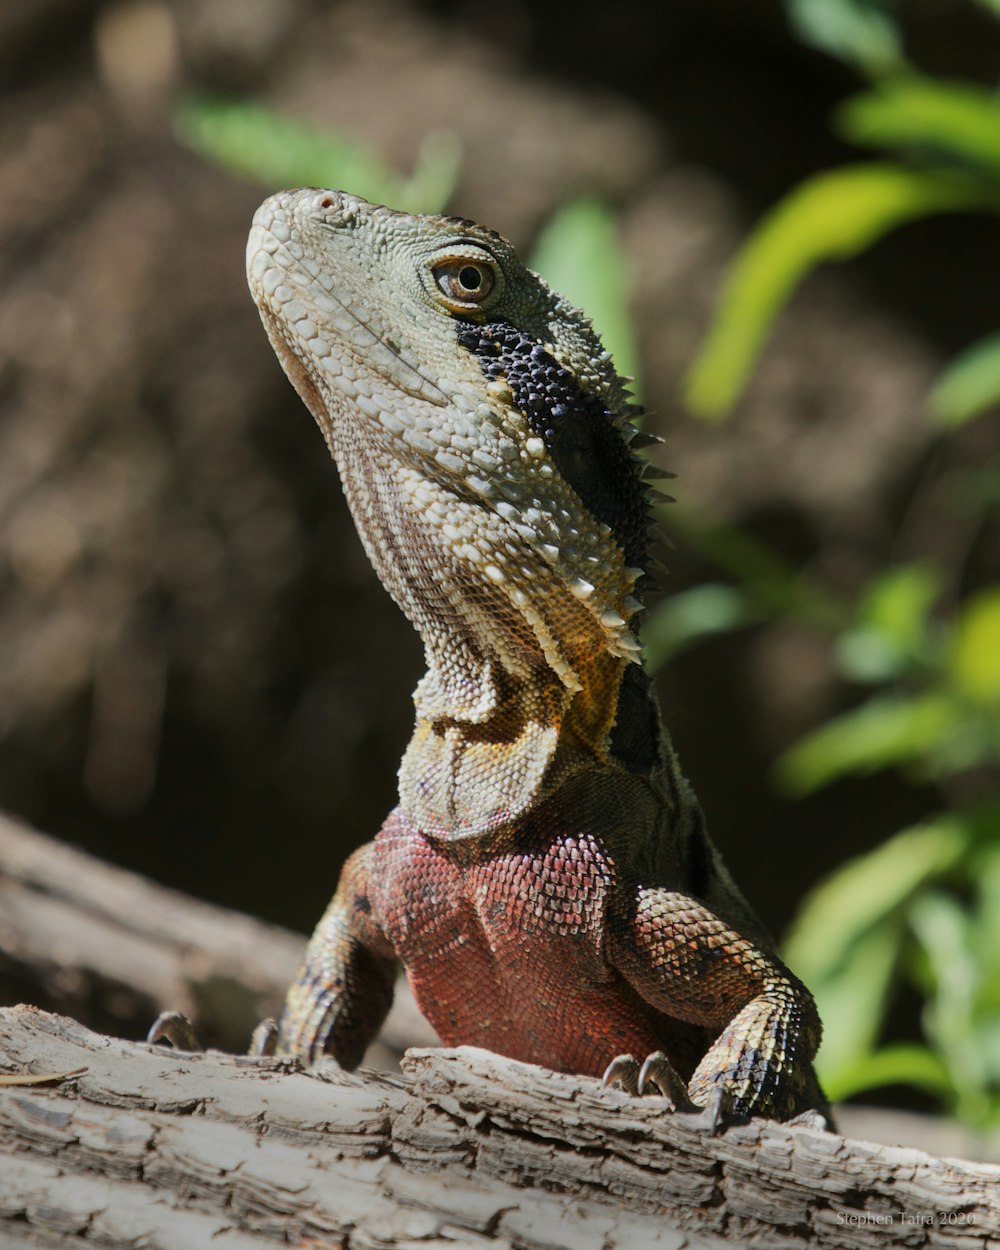 brown and black bearded dragon on brown tree branch during daytime